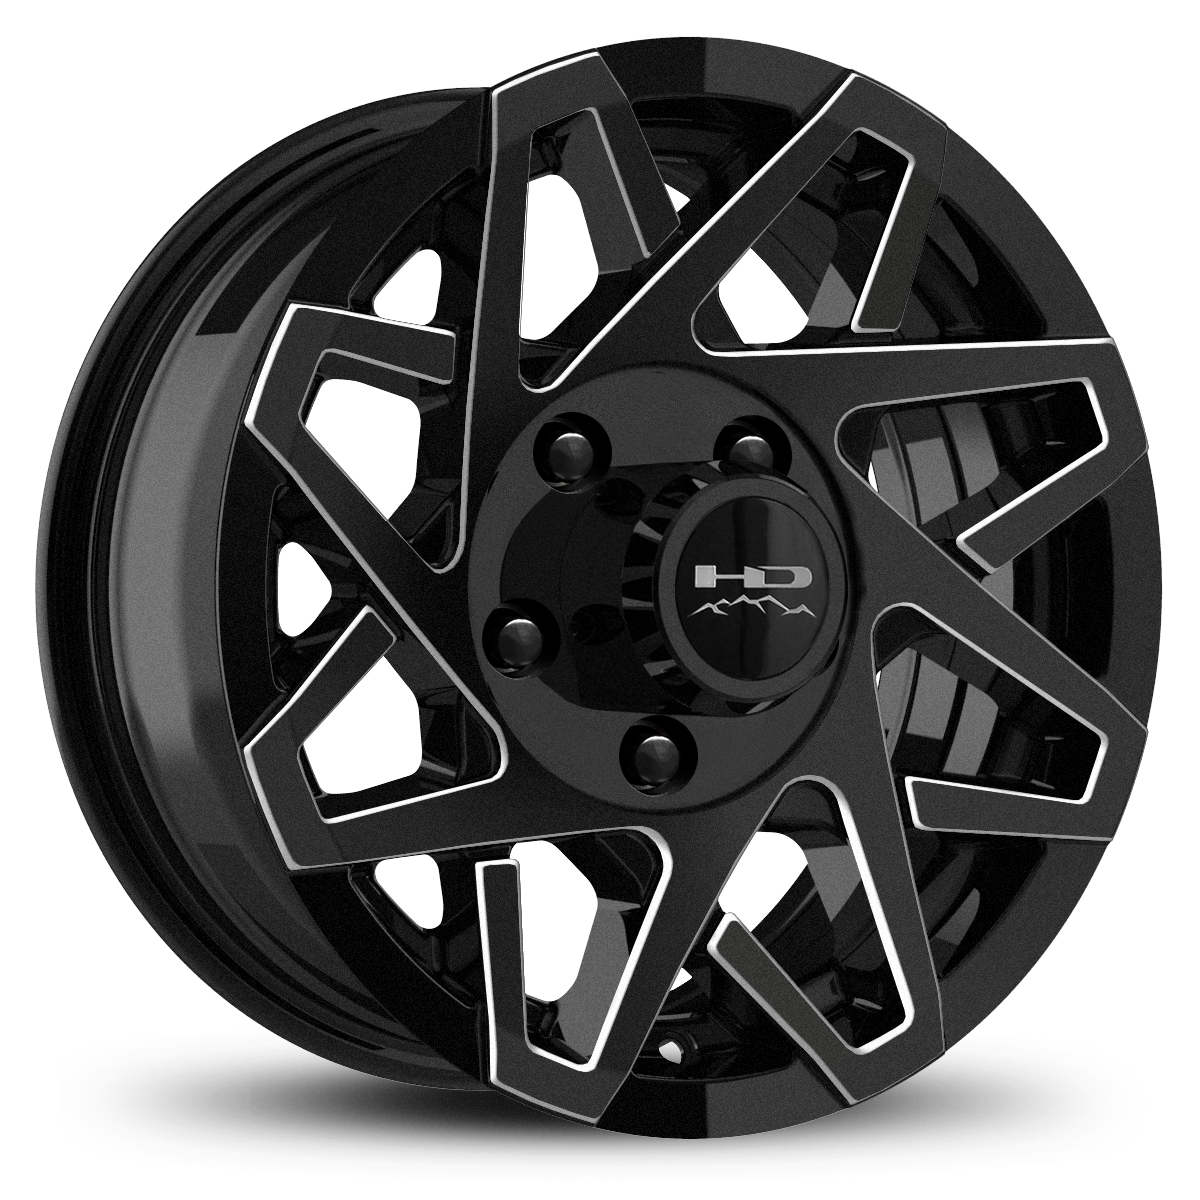 HD Off-Road Canyon Custom Trailer Wheel Rims in 15x6.0  15x6 Gloss Black CNC Milled Spoke Edges with Center Cap & Logo fits 5x4.50 / 5x114.3 Axle Boat, Car, RV, Travel, Concession, Horse, Utility, Lawn & Garden, & Landscaping.